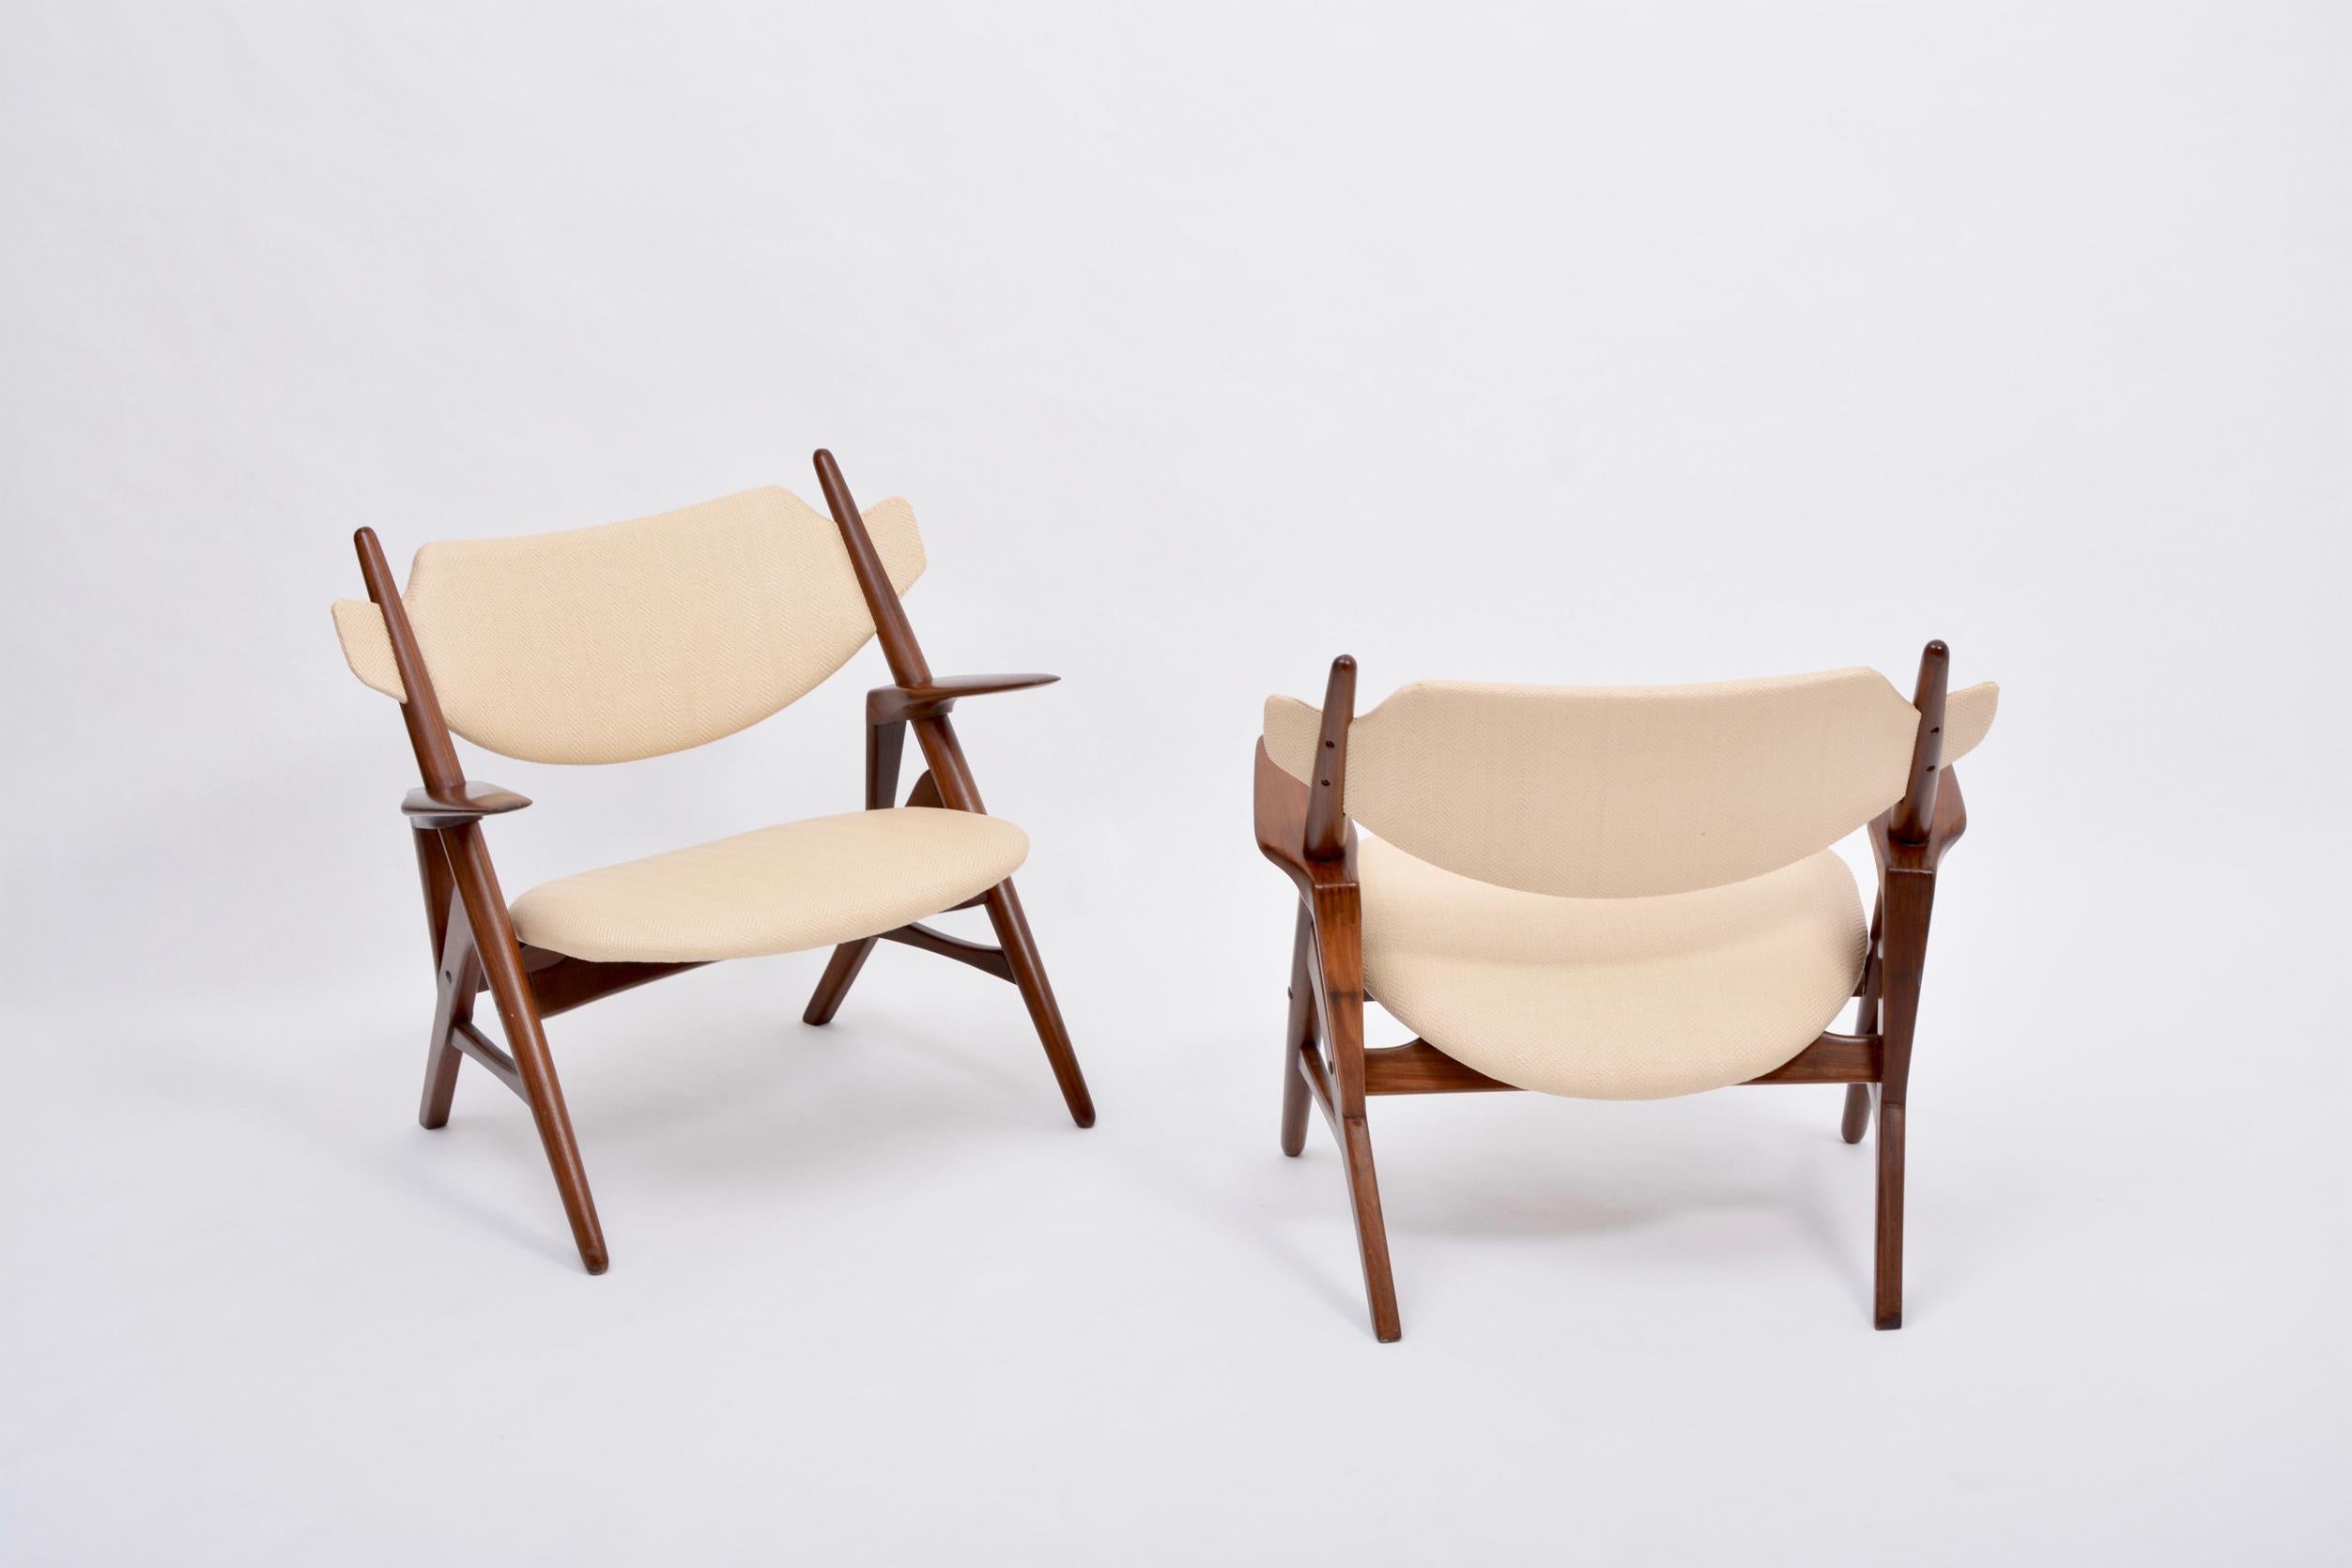 20th Century Pair of Reupholstered Mid-Century Modern Chairs 